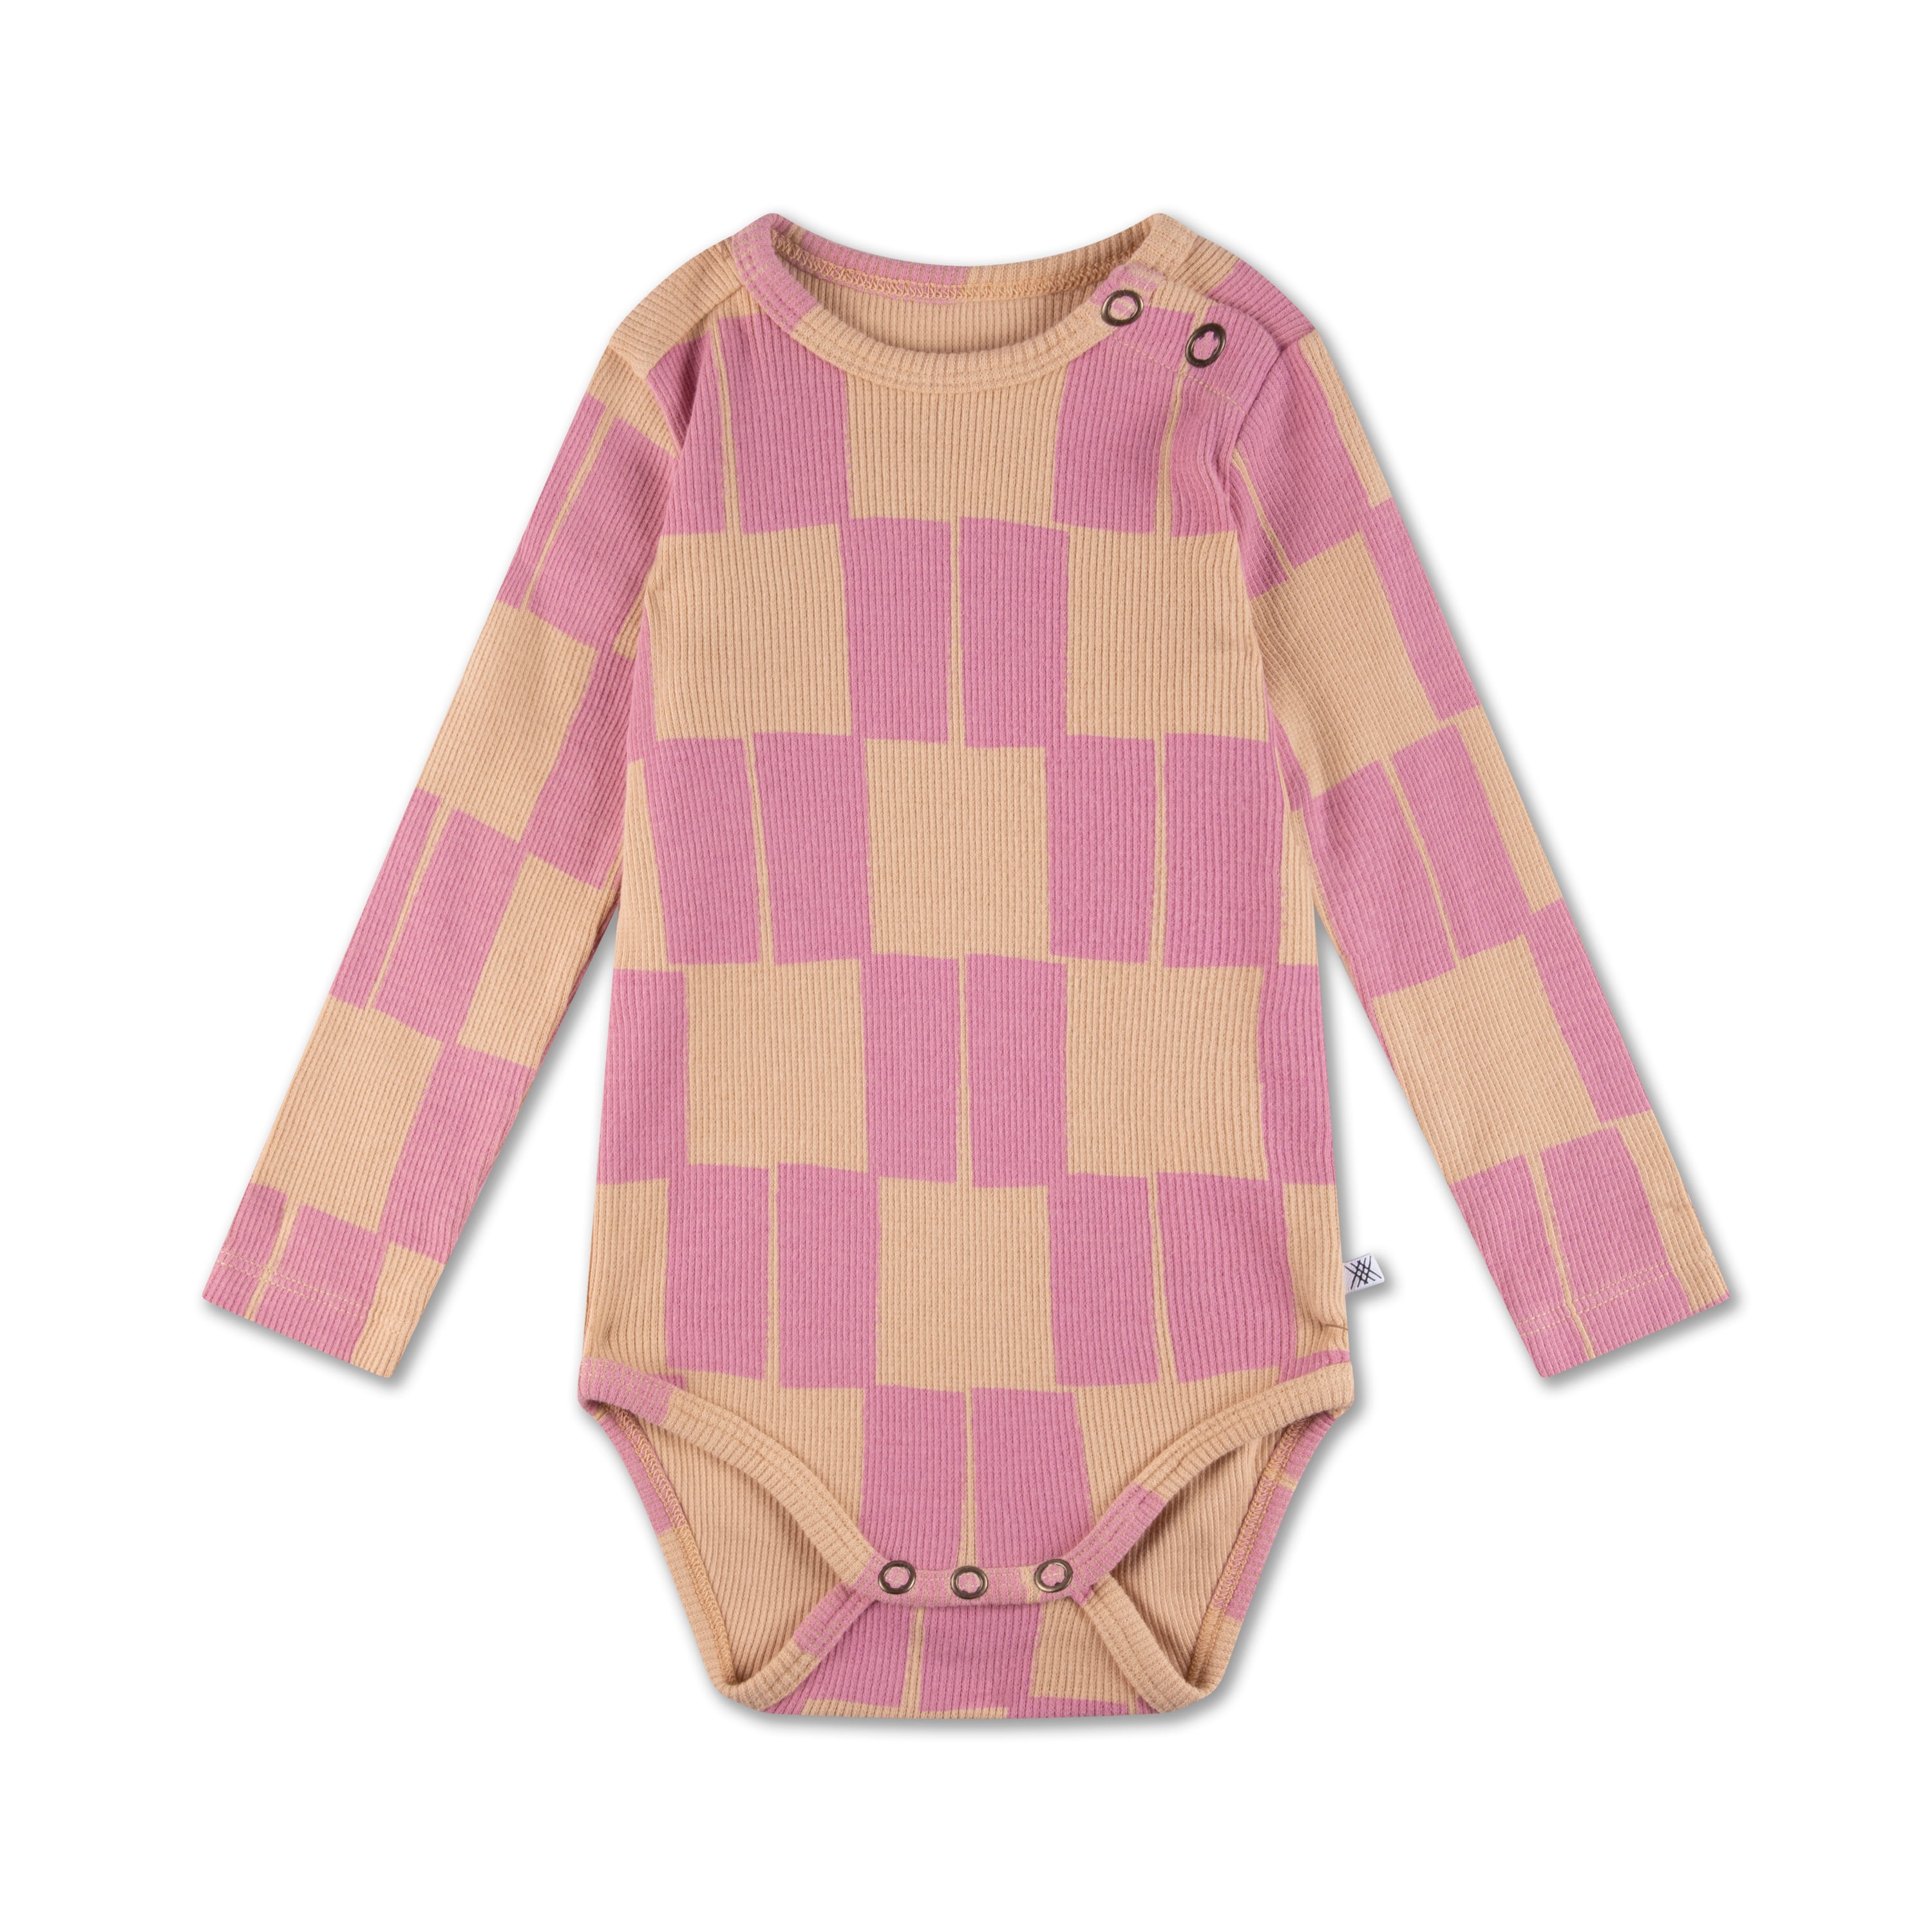 〈 REPOSE AMS 23AW / BABY 〉bodysuit / soft pink tiles | 世界のちいさな洋服のお店　ピーカブーヤ  powered by BASE